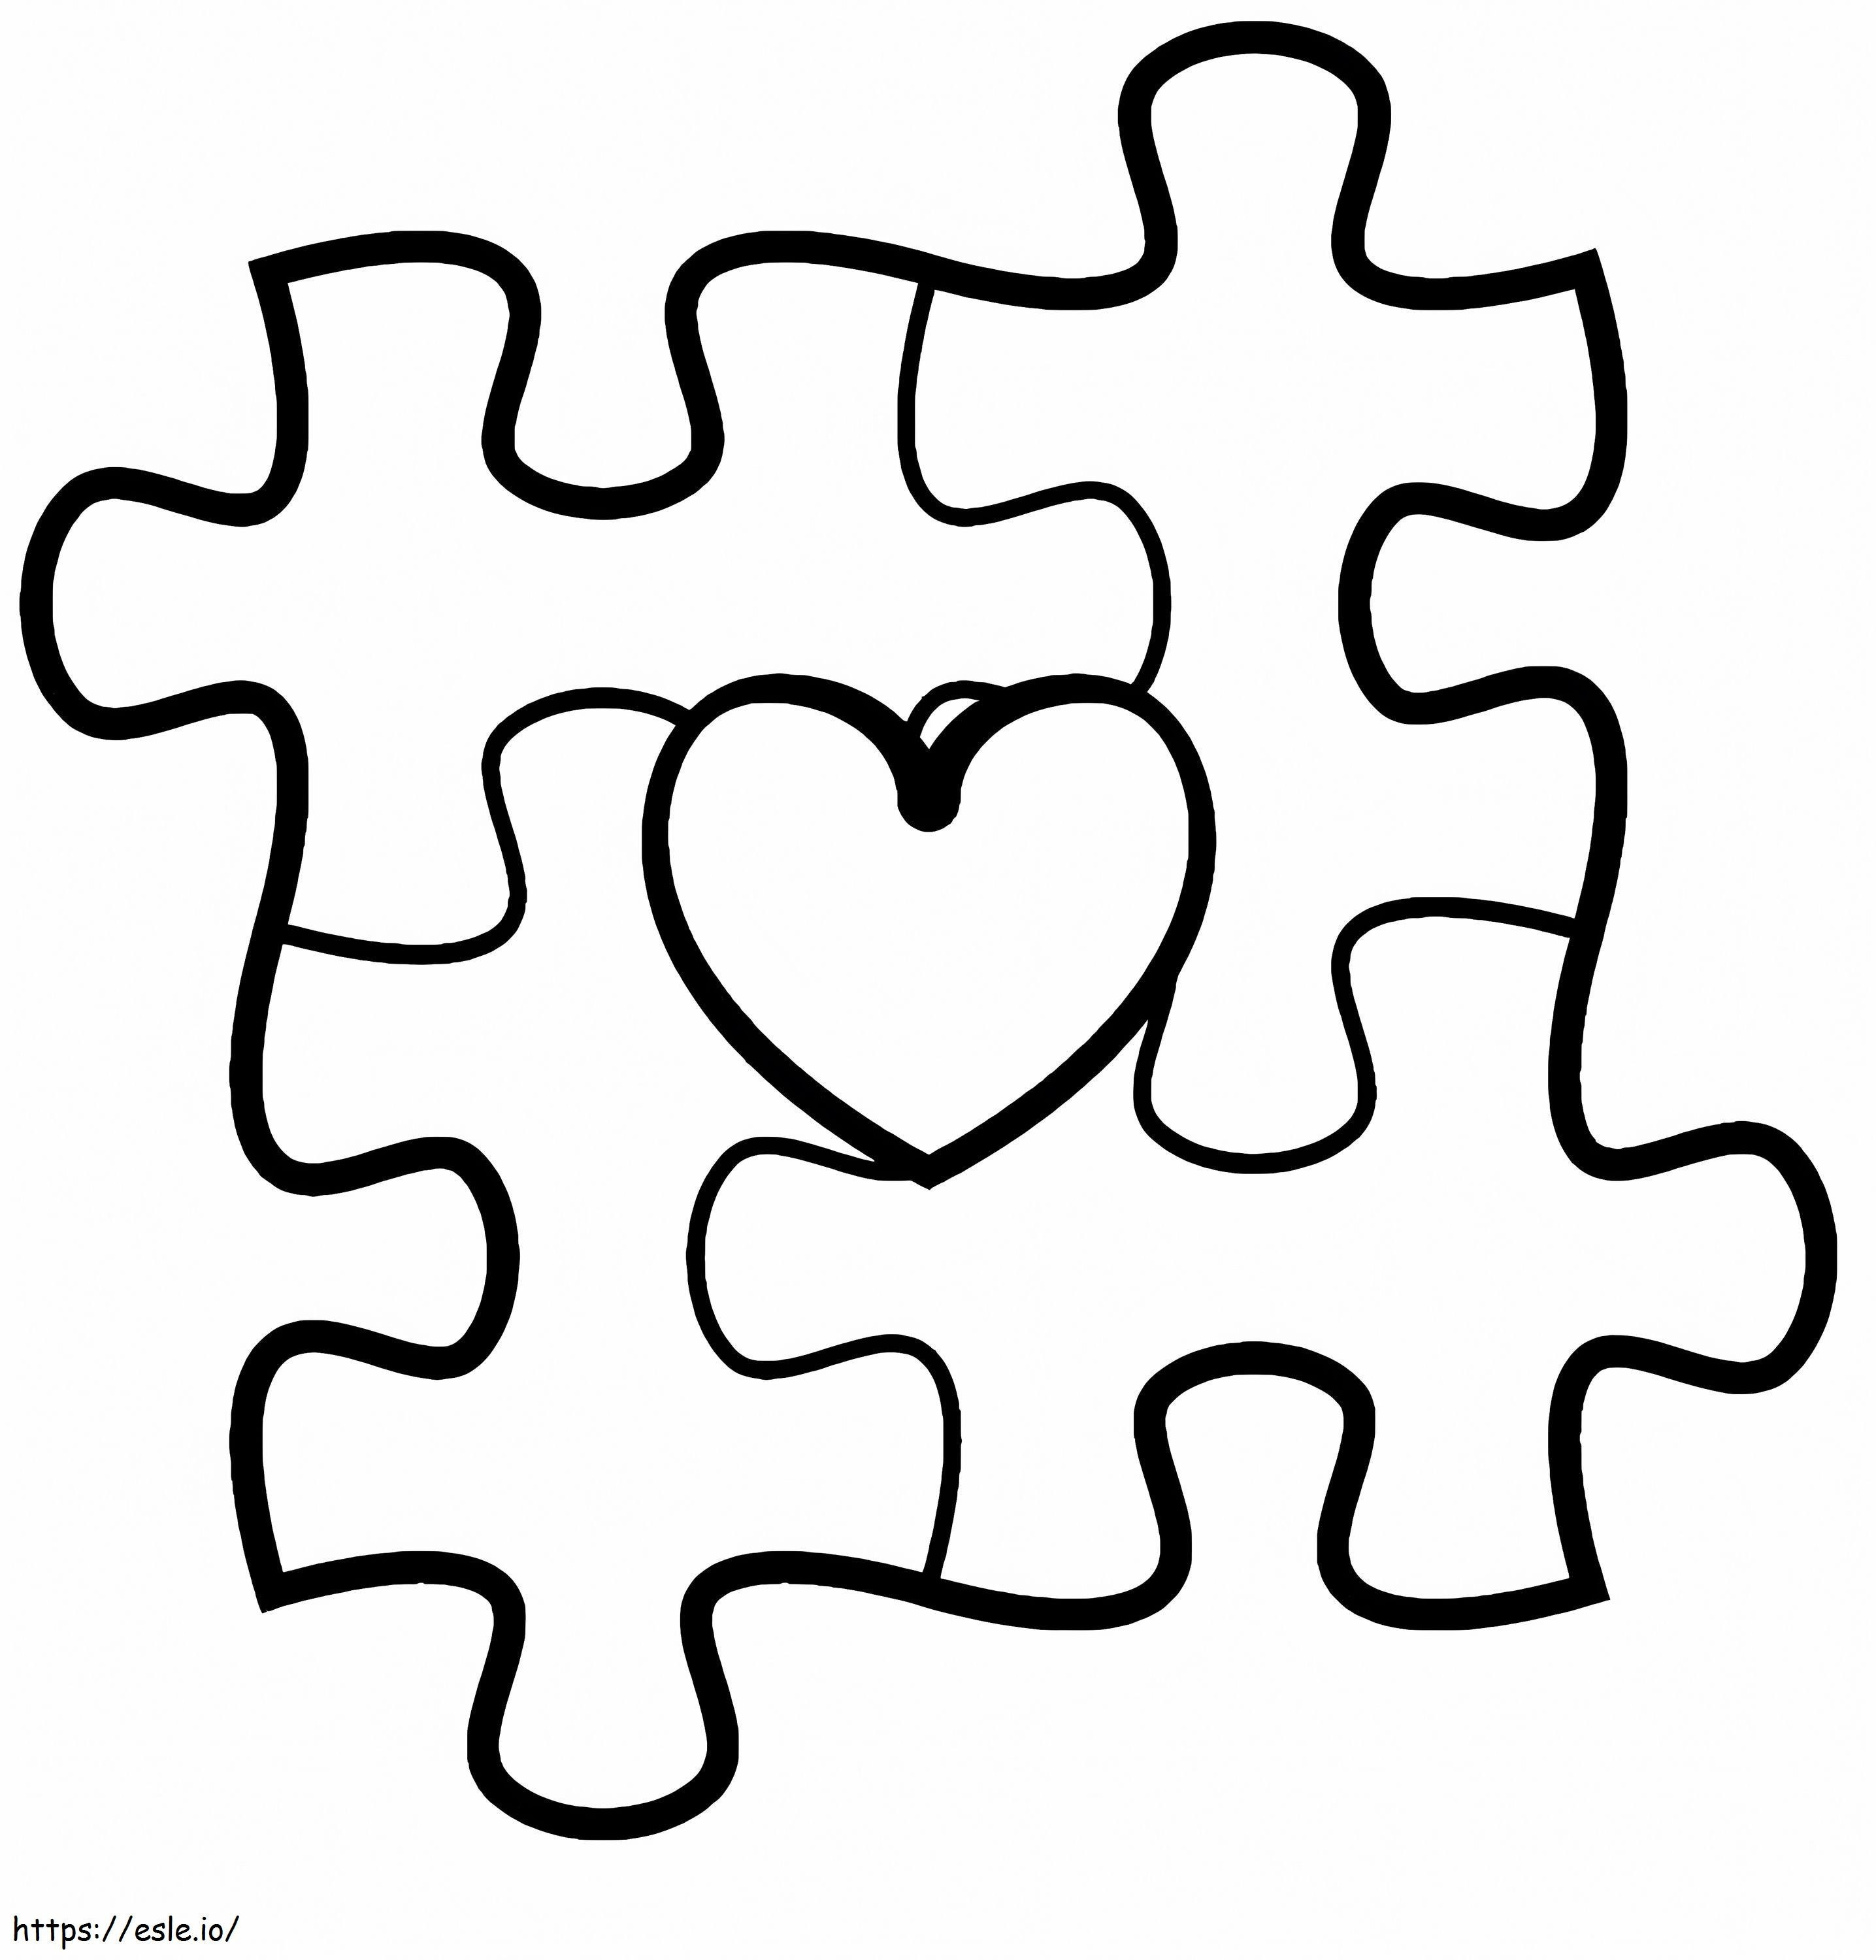 Autism Awareness Puzzle Pieces Heart coloring page